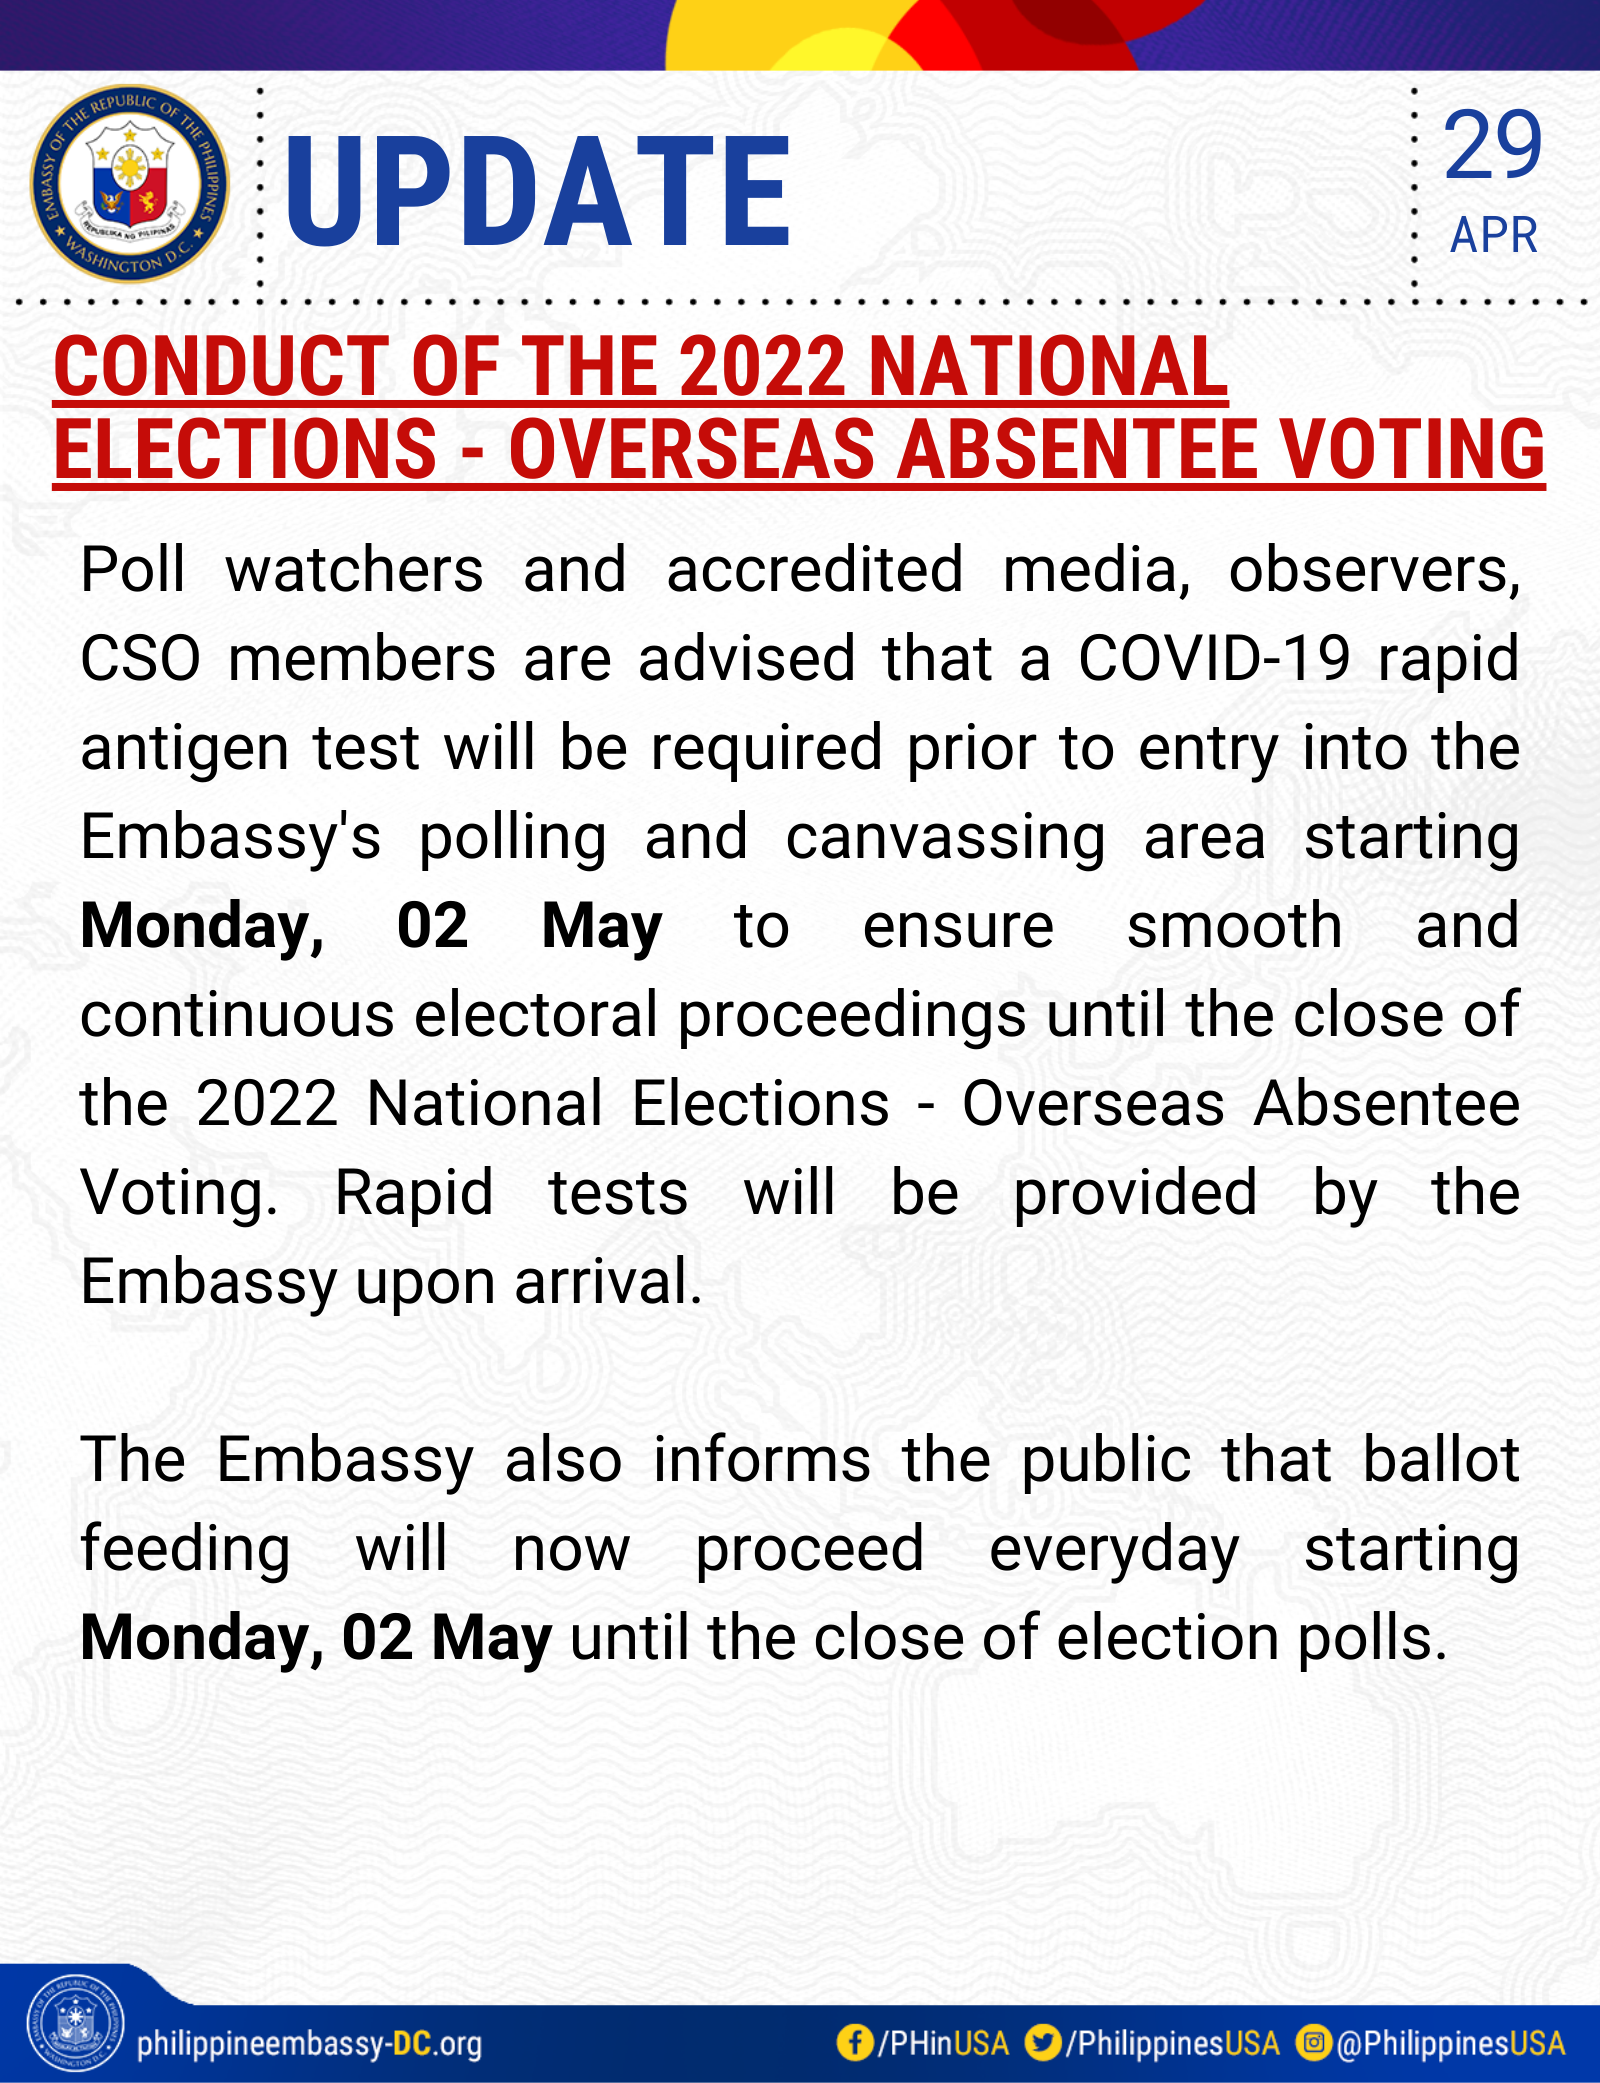 UPDATES ON THE CONDUCT OF THE 2022 NATIONAL ELECTIONS – OAV